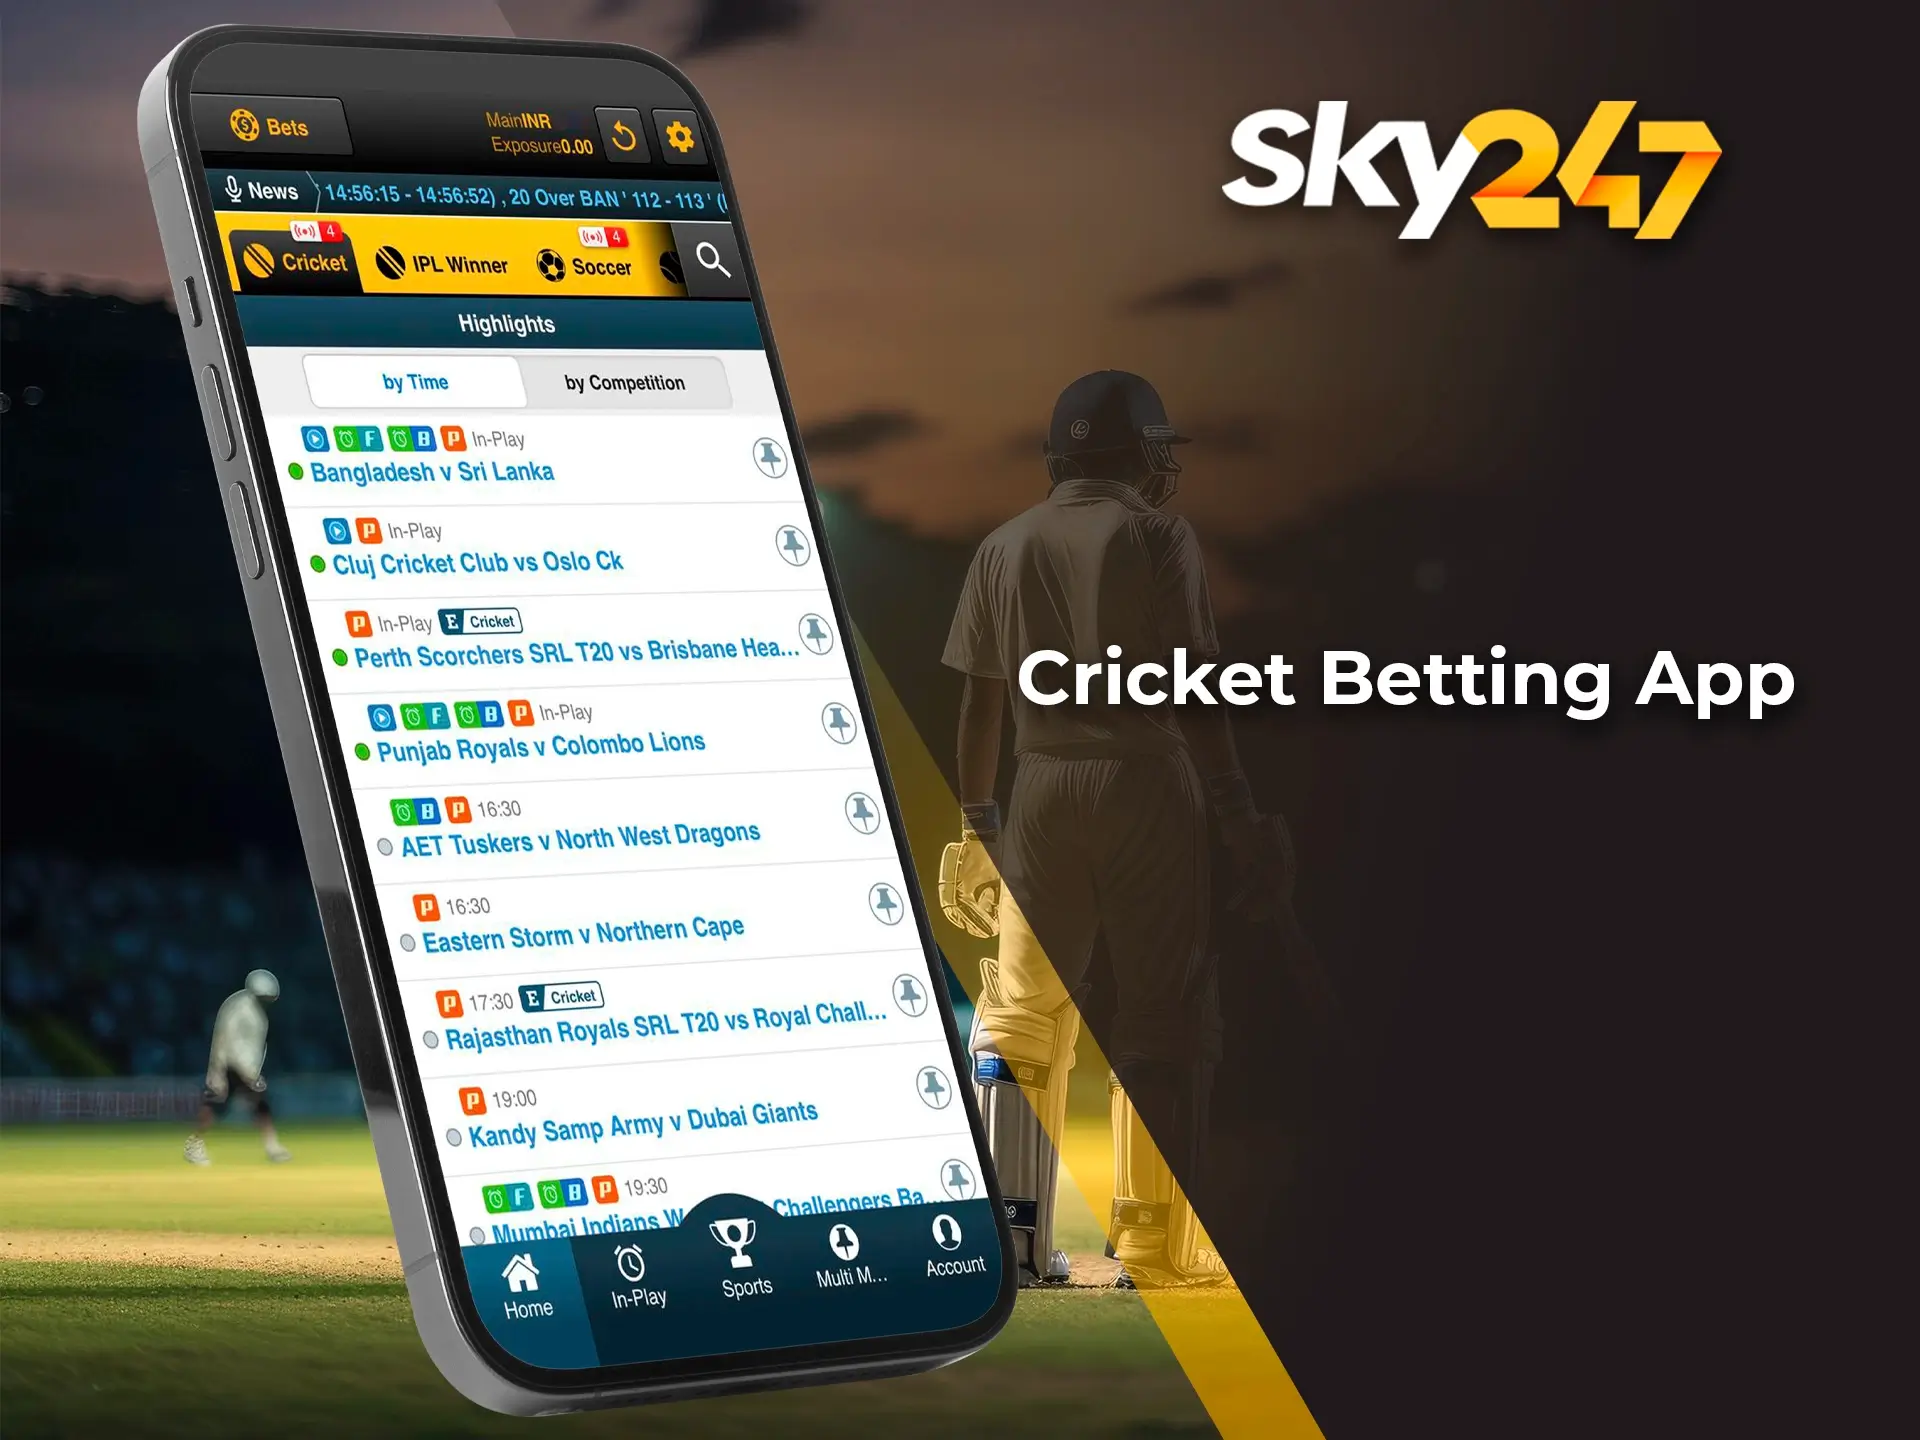 Open the cricket tab on the Sky247 app and make your first prediction.